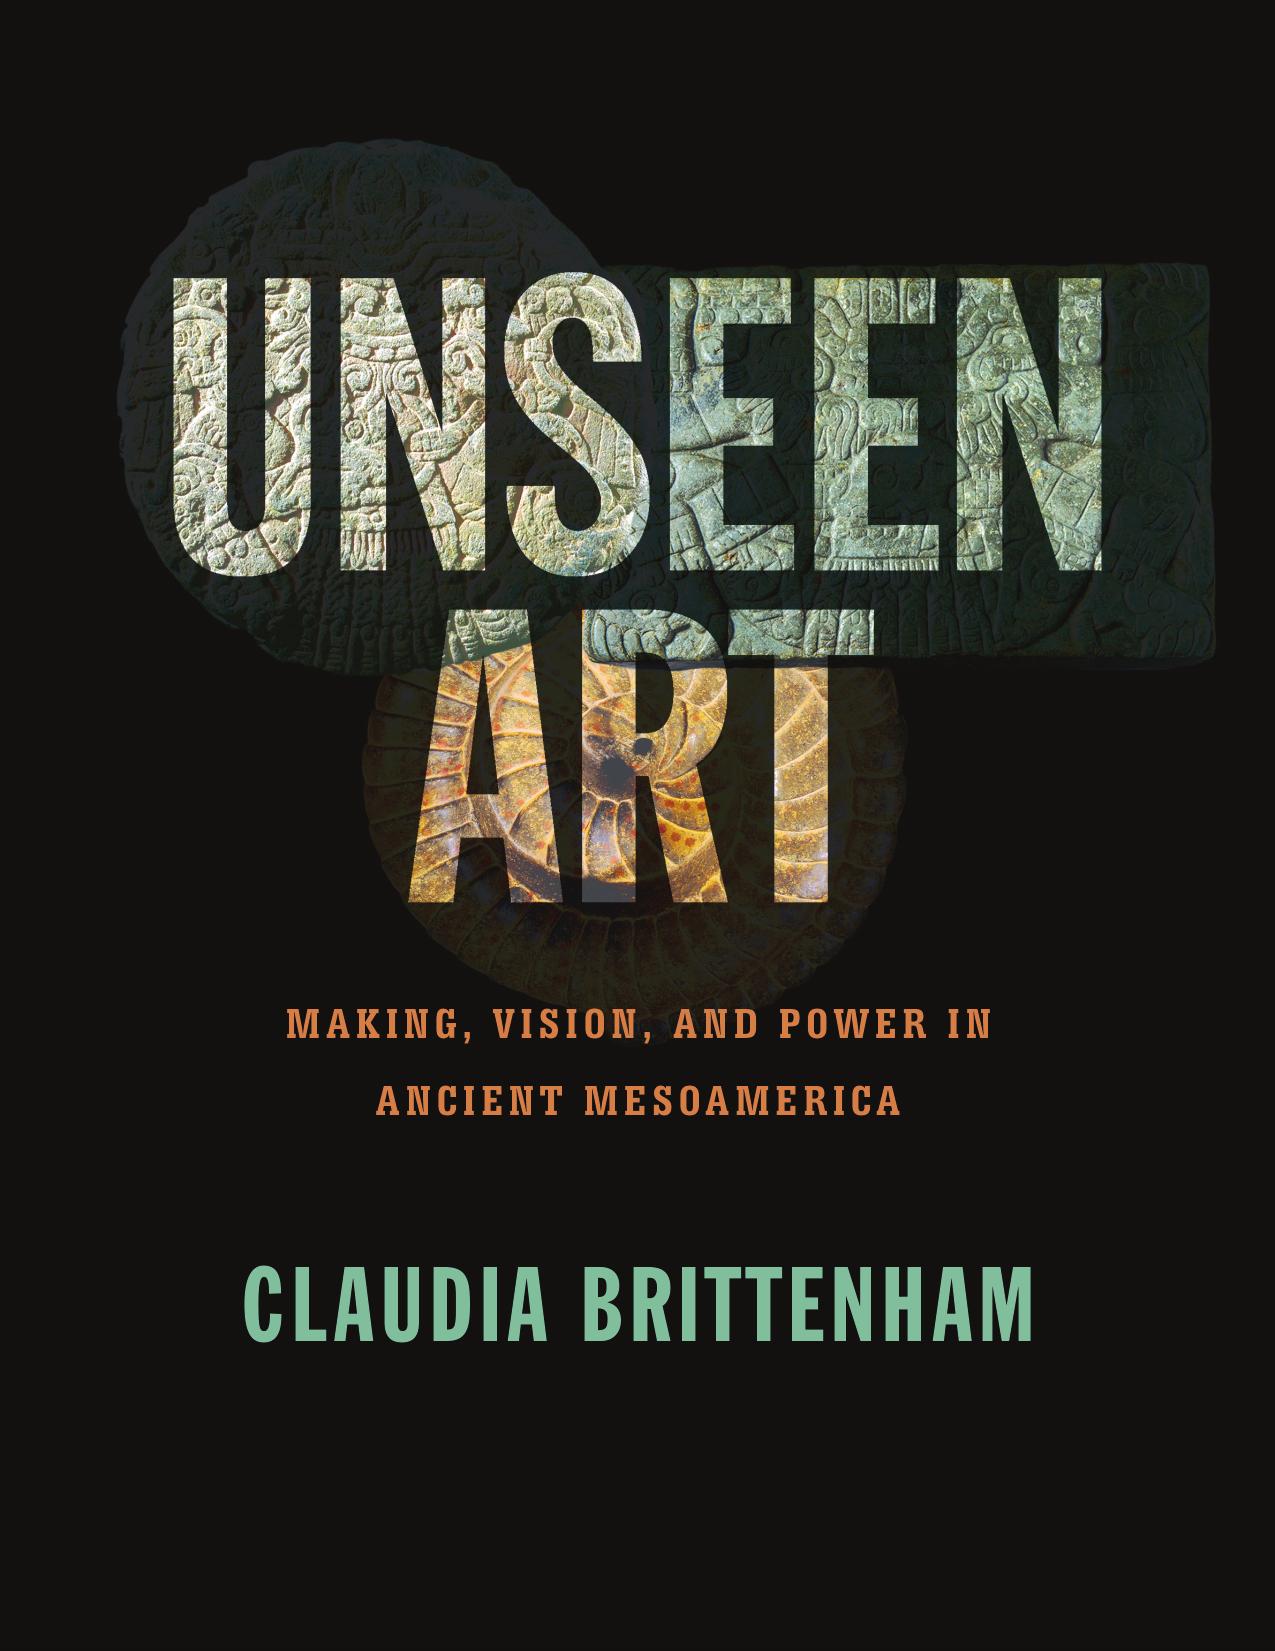 Unseen Art: Making, Vision, and Power in Ancient Mesoamerica by Claudia Brittenham